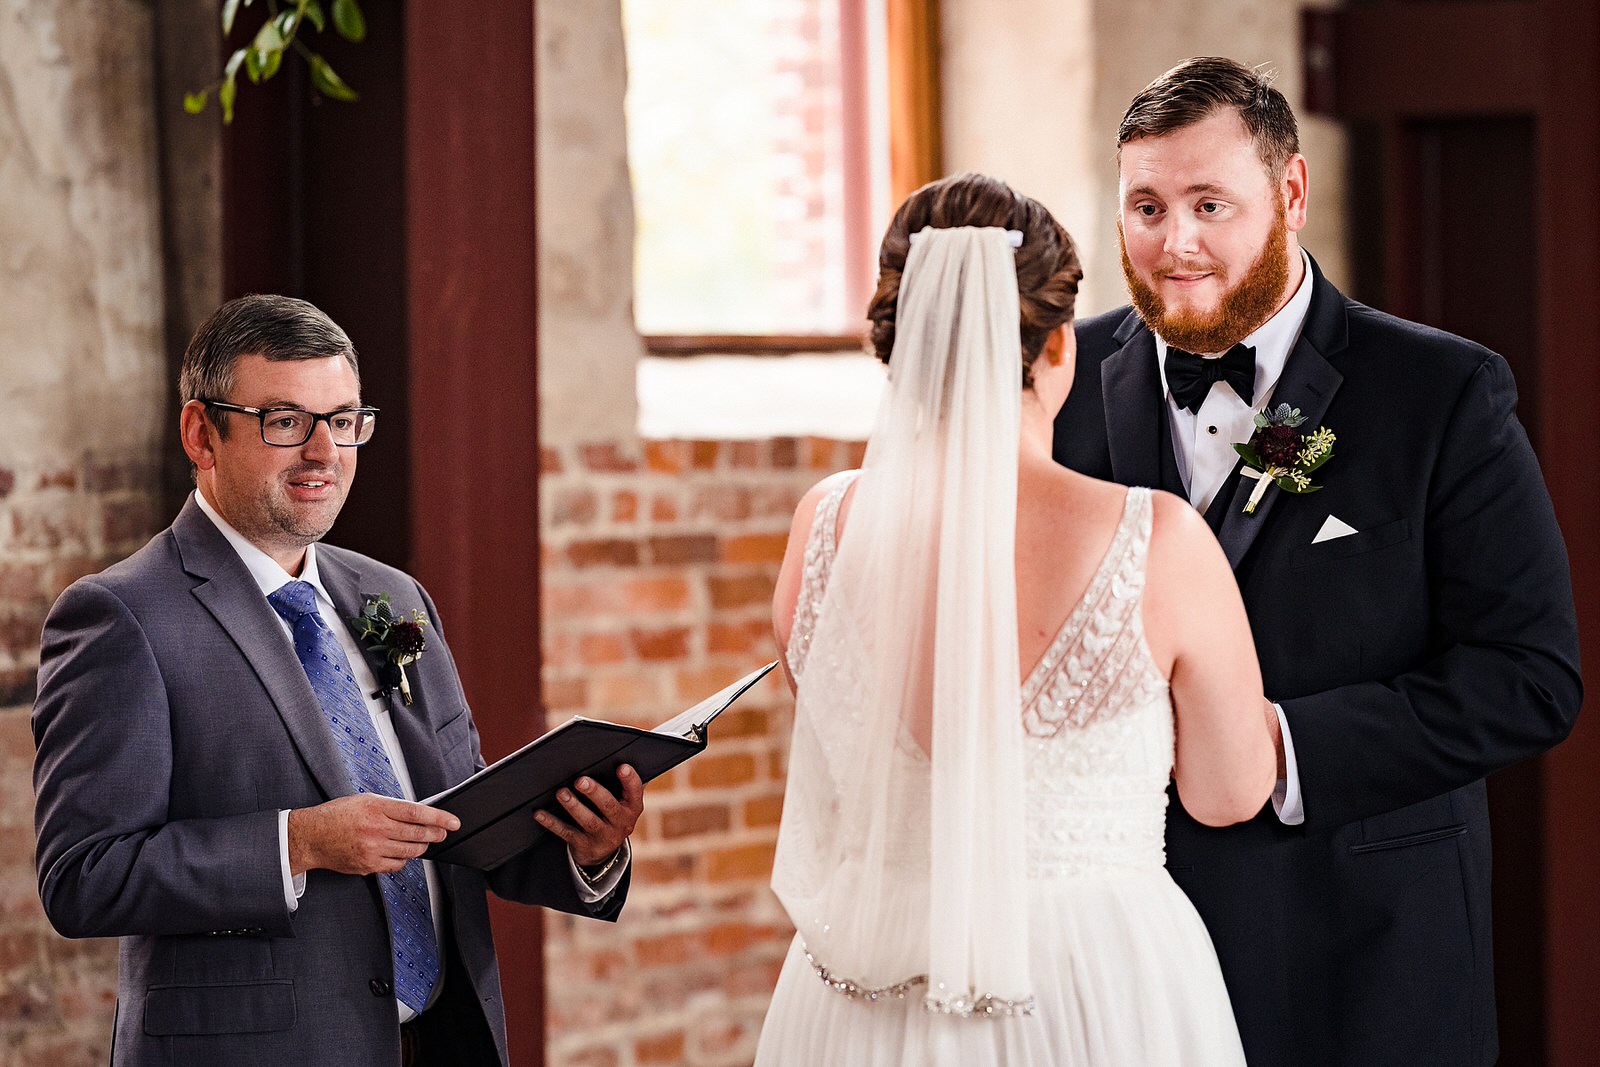 Groom looks lovingly at bride as they exchange personalized wedding vows